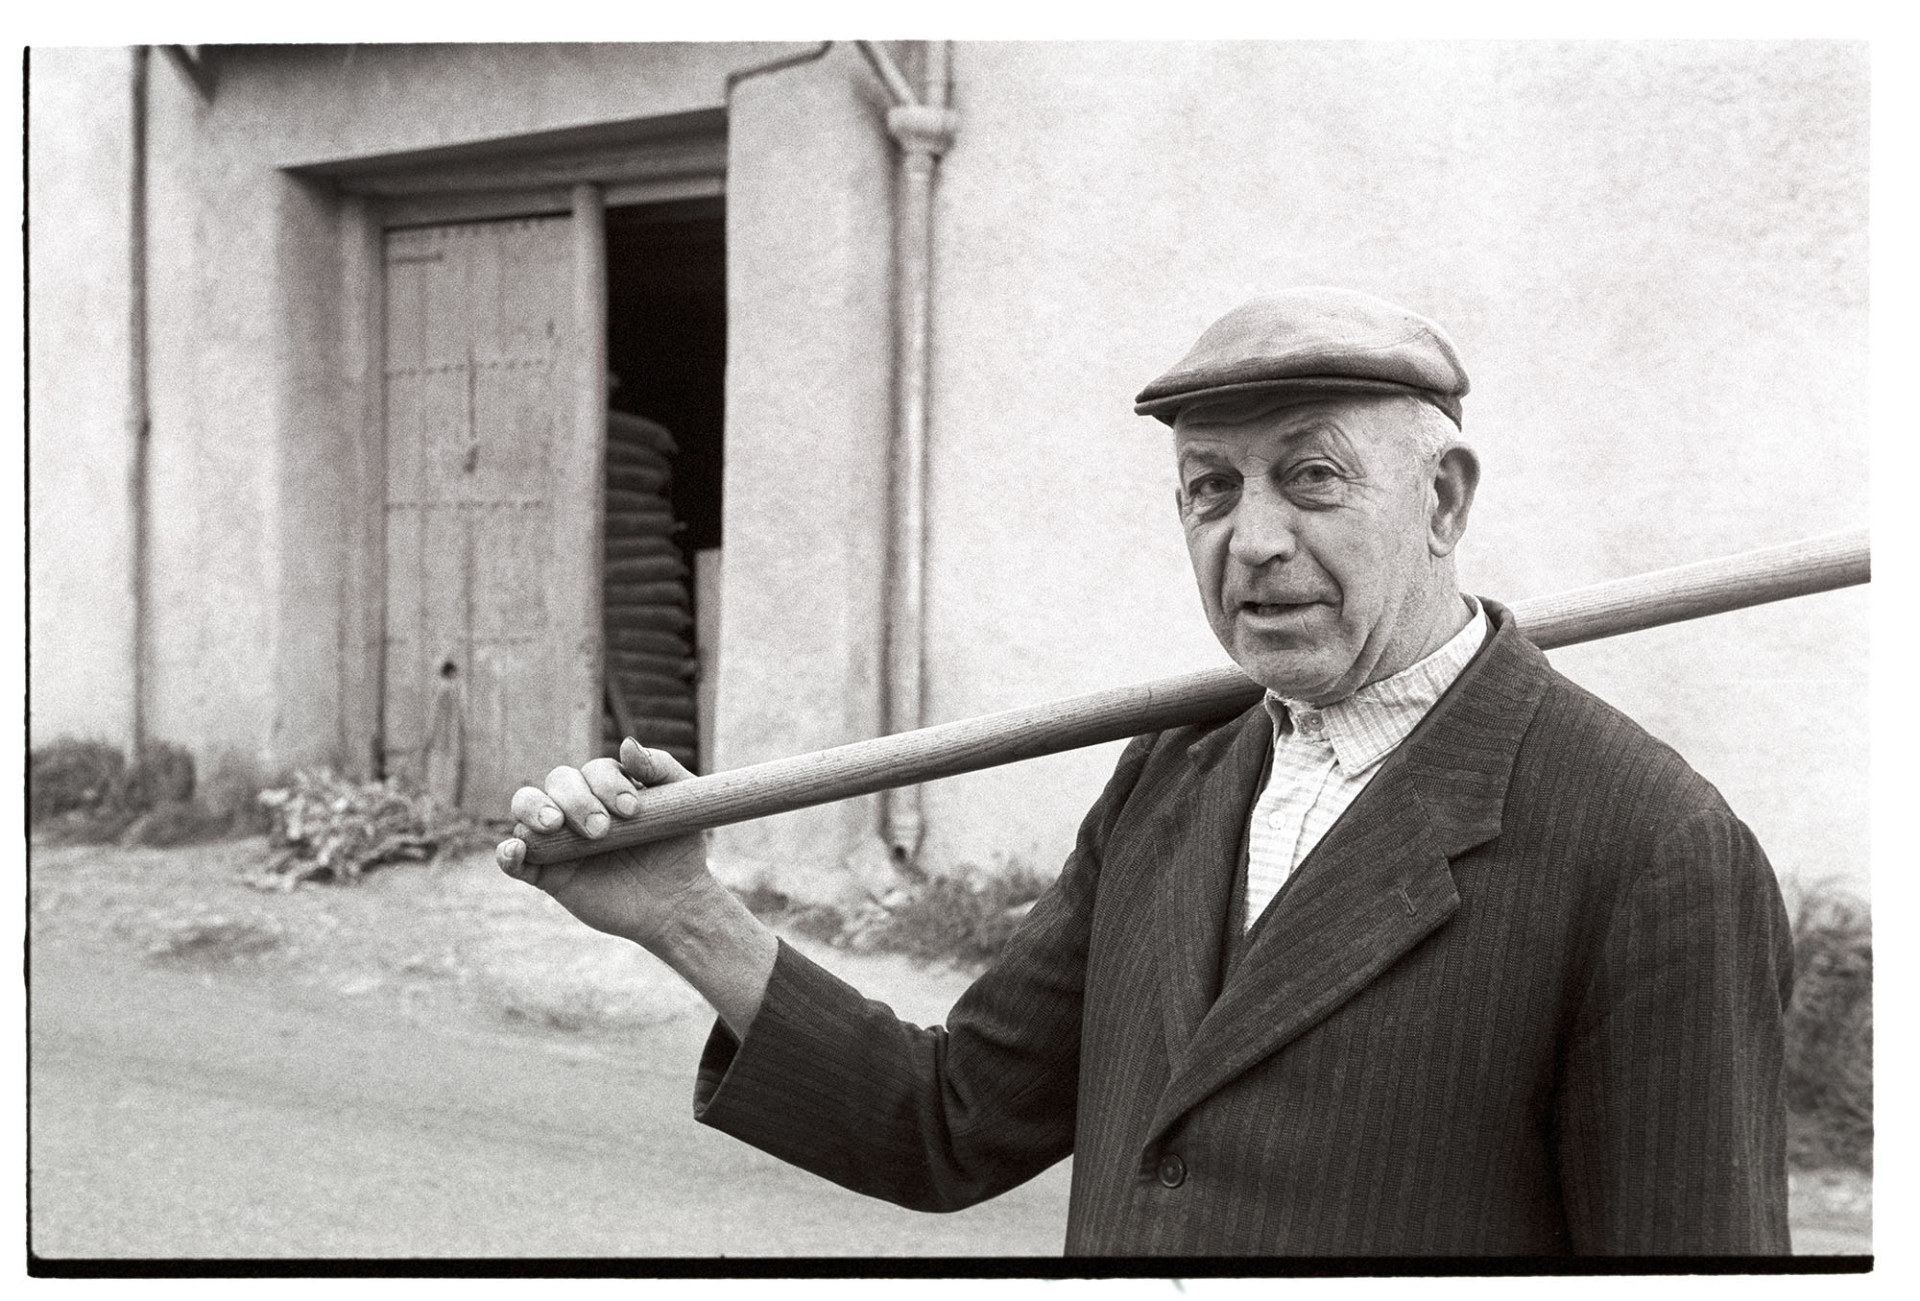 Farmer standing in cap.
[Richard Pearce wearing a cap and carrying a tool on his shoulder and standing in a street in Monkokehampton.]